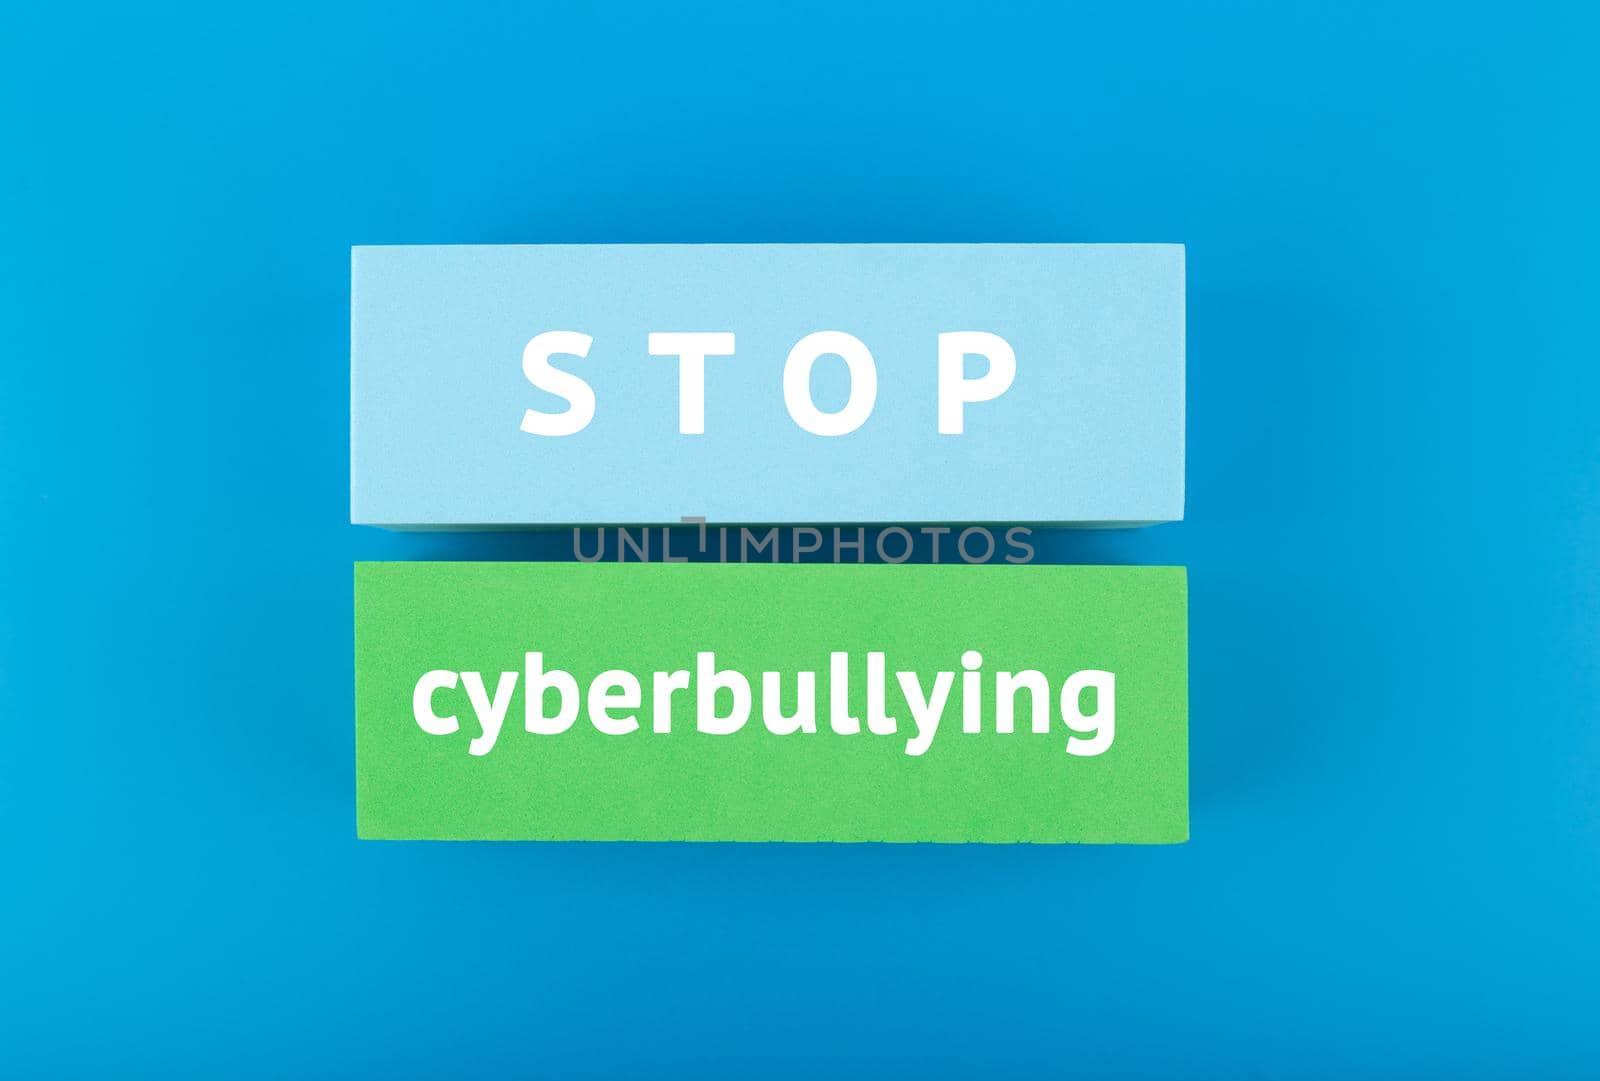 Stop cyberbullying concept. Minimal flat lay with text on blue background by Senorina_Irina